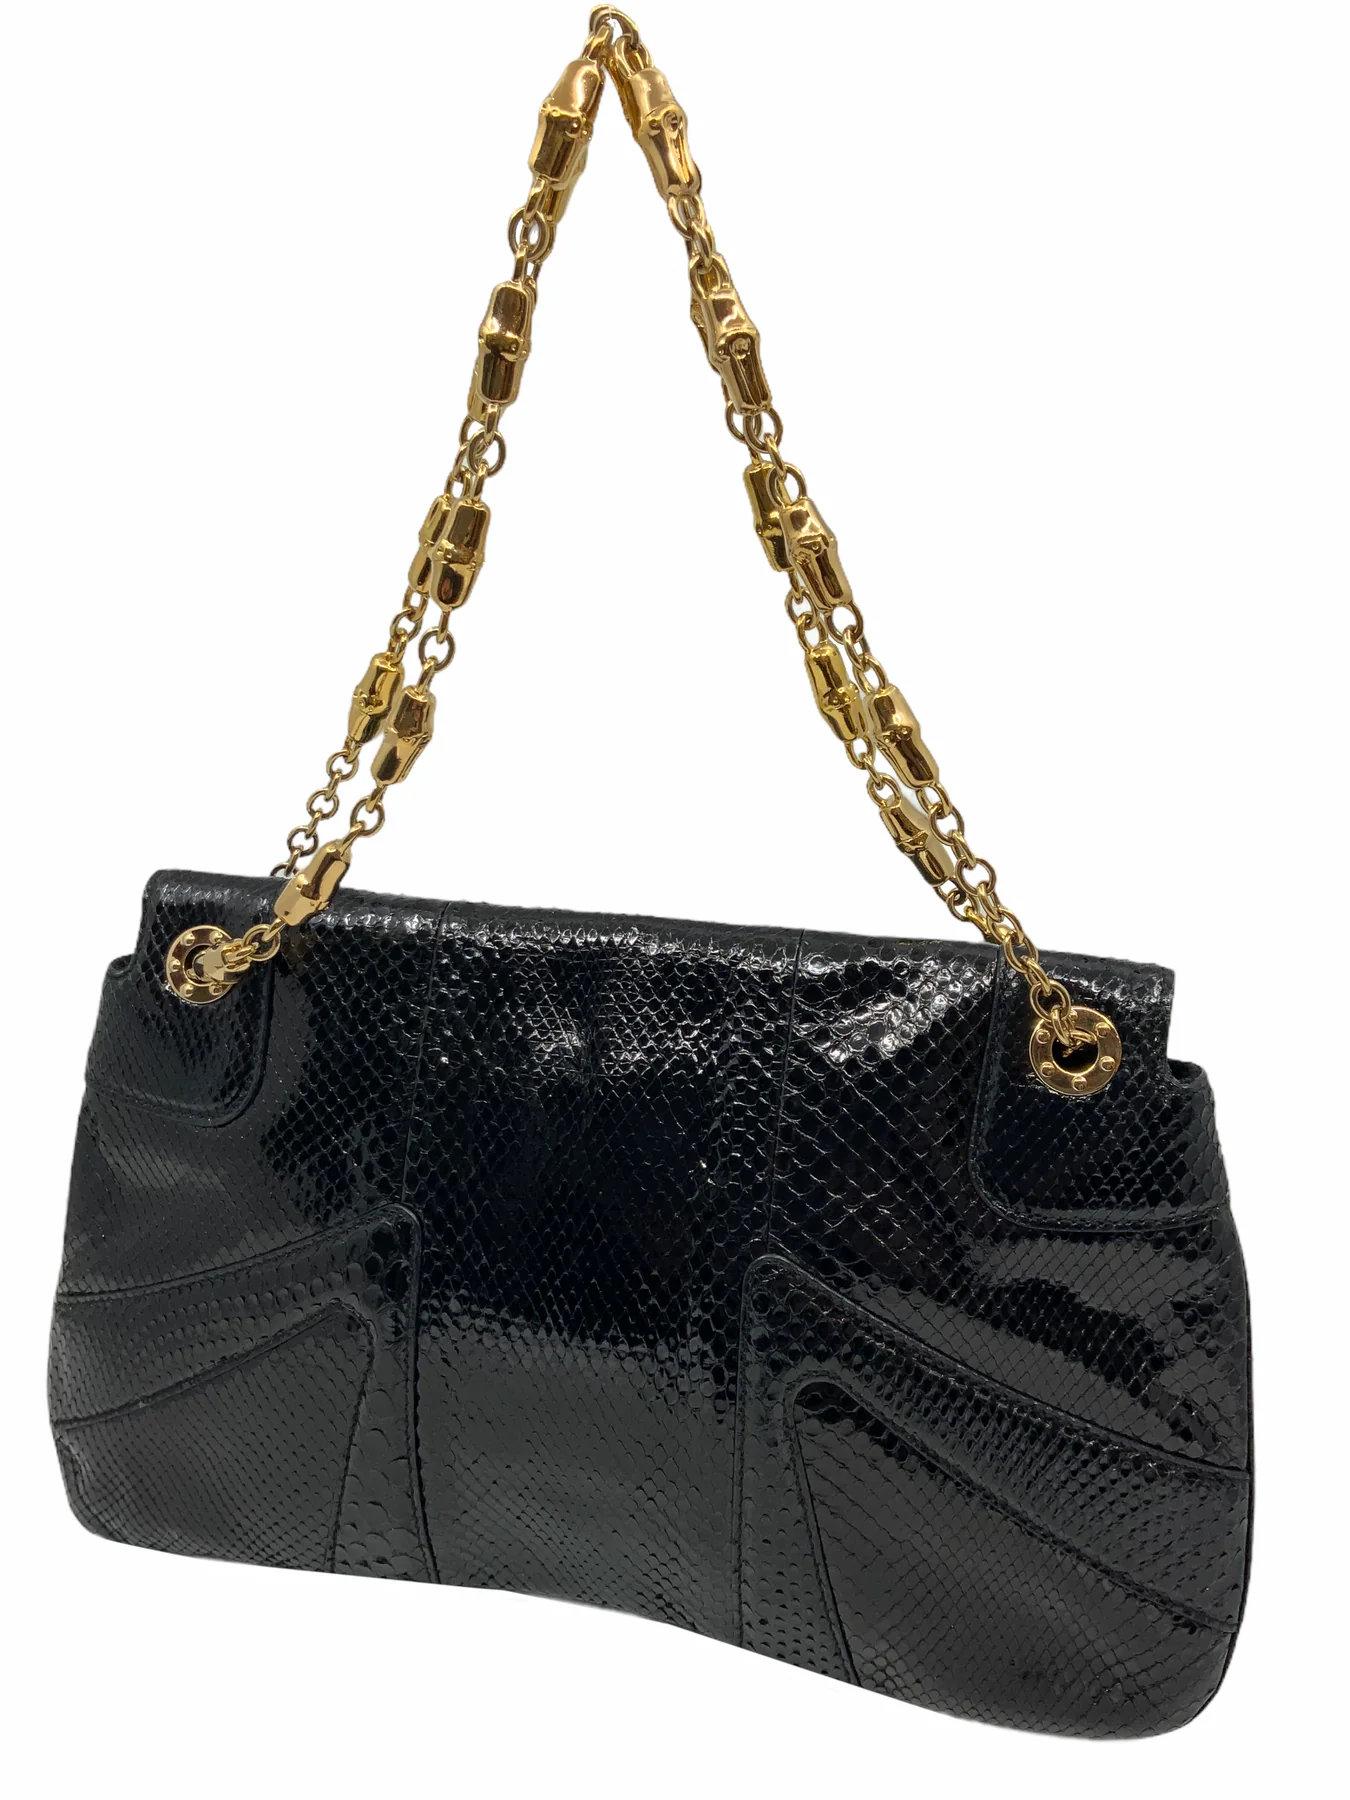 Women's Gucci Limited Edition Tom Ford for Gucci Snakeskin Jeweled Dragon Bag